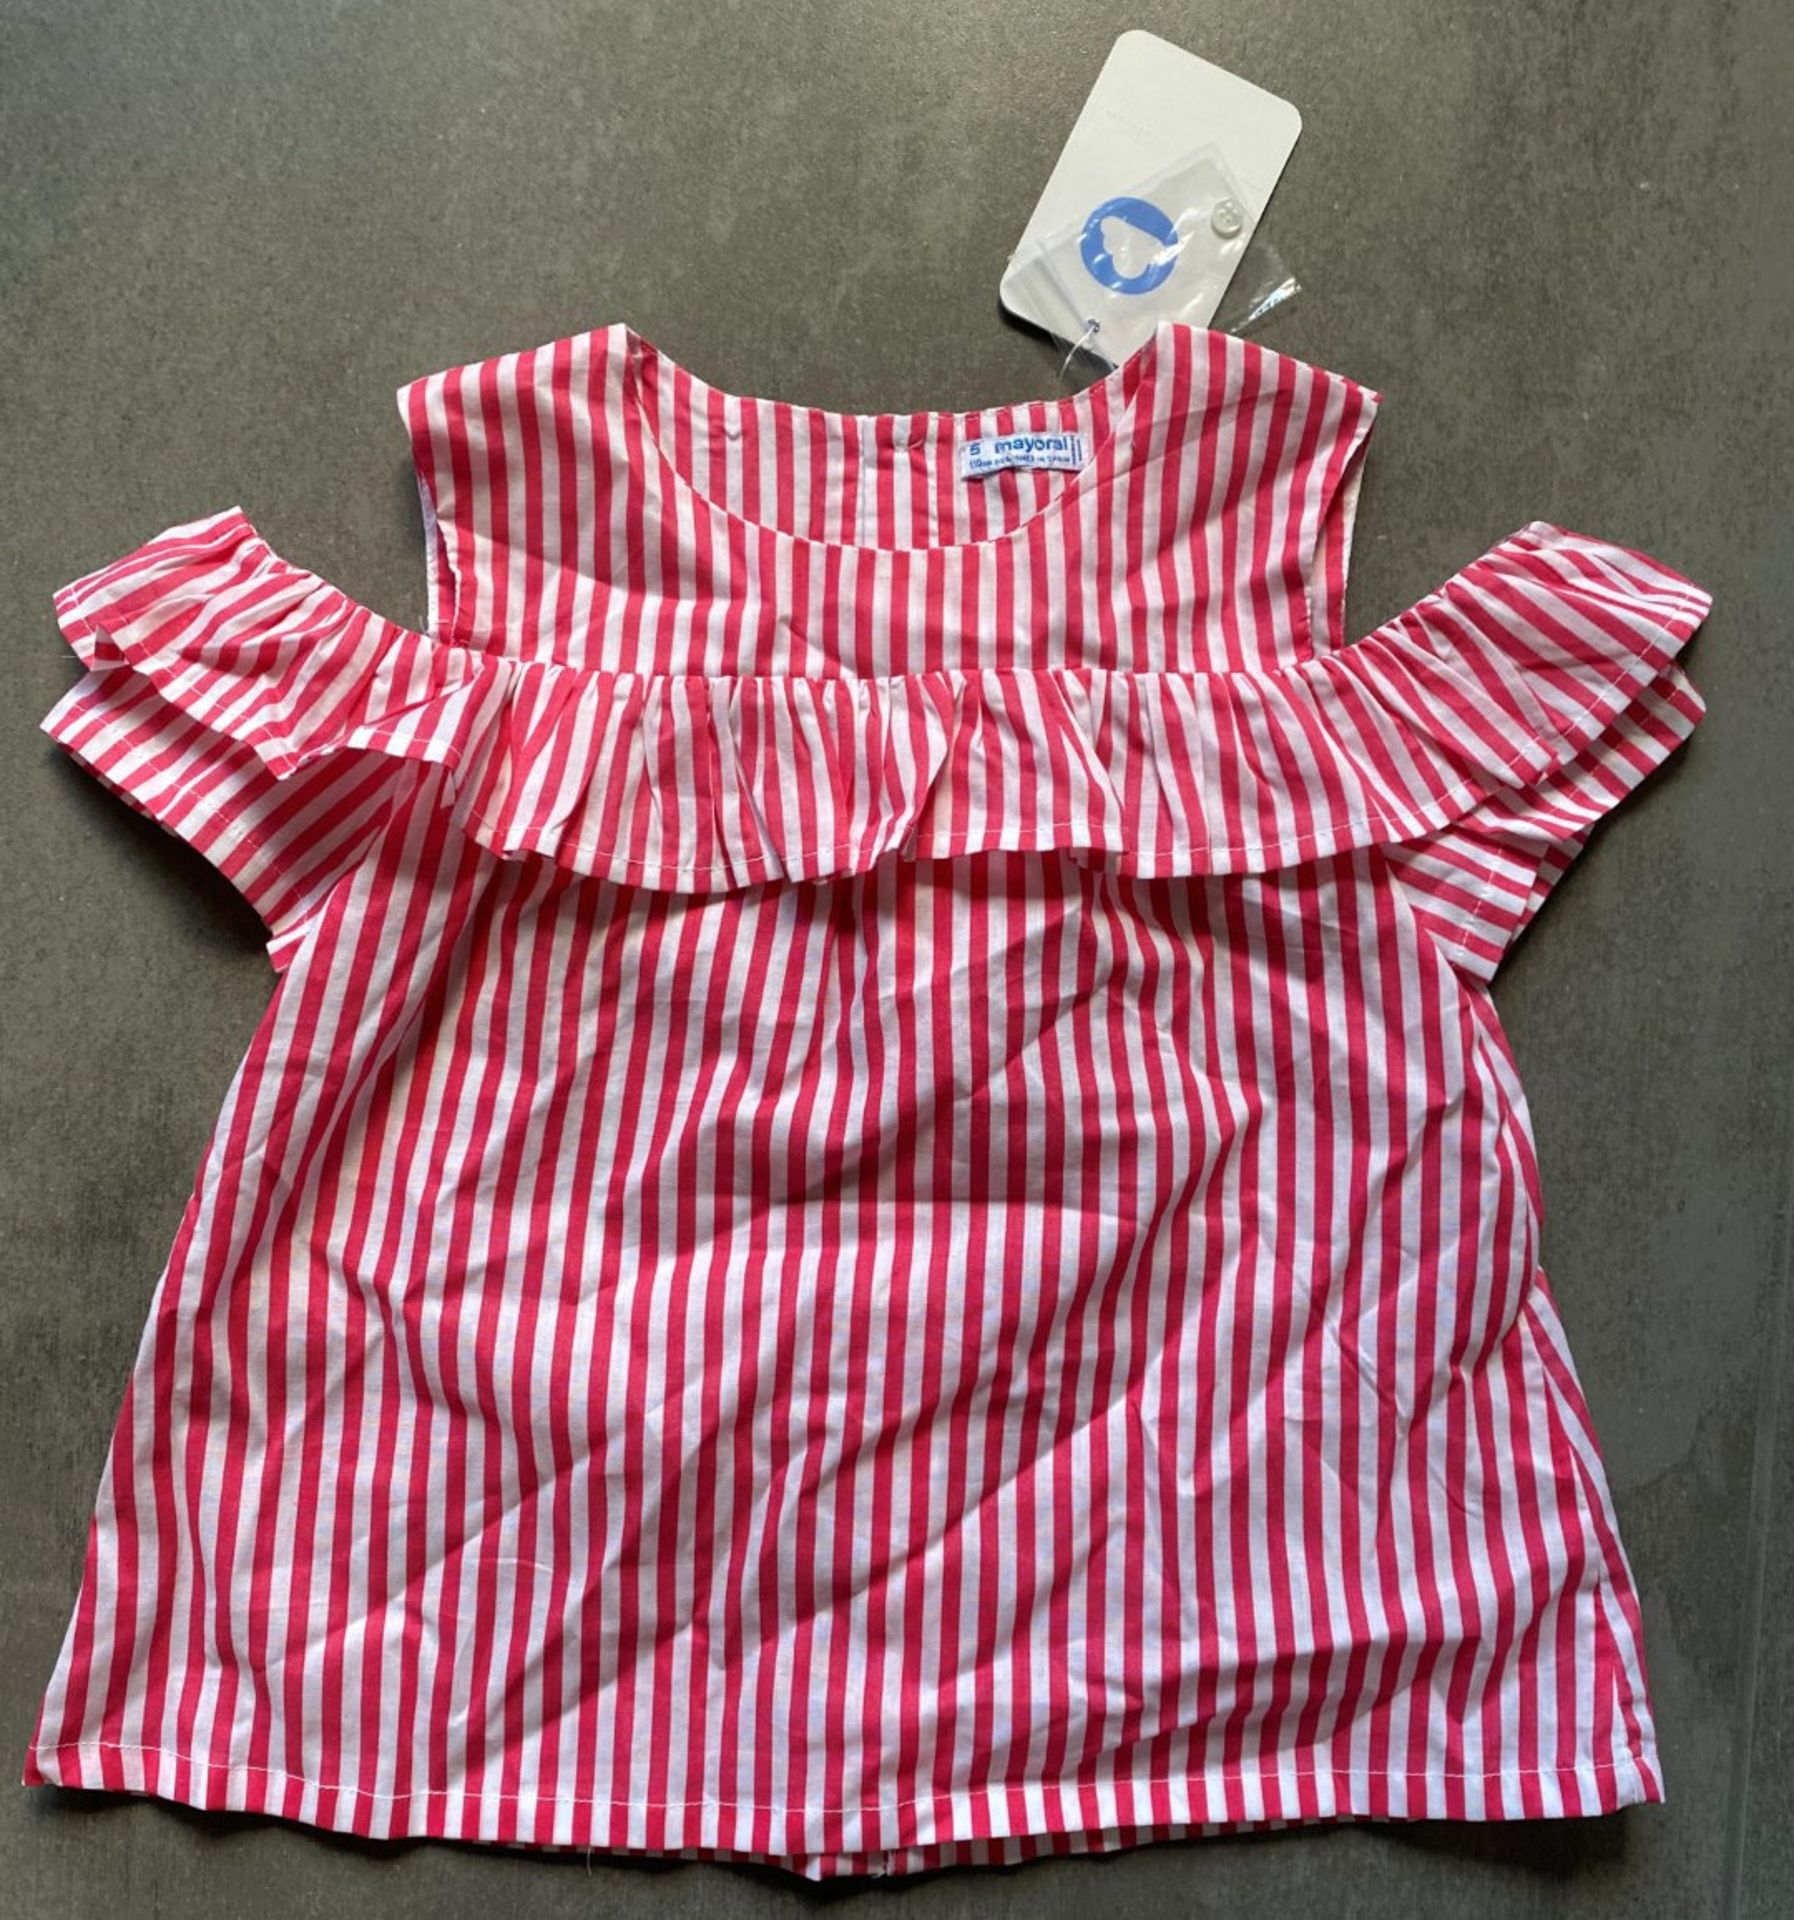 9 x Assorted Items Of Designer Children's Clothing - New With Tags - Suitable For Ages 5 And 6 Years - Image 34 of 47